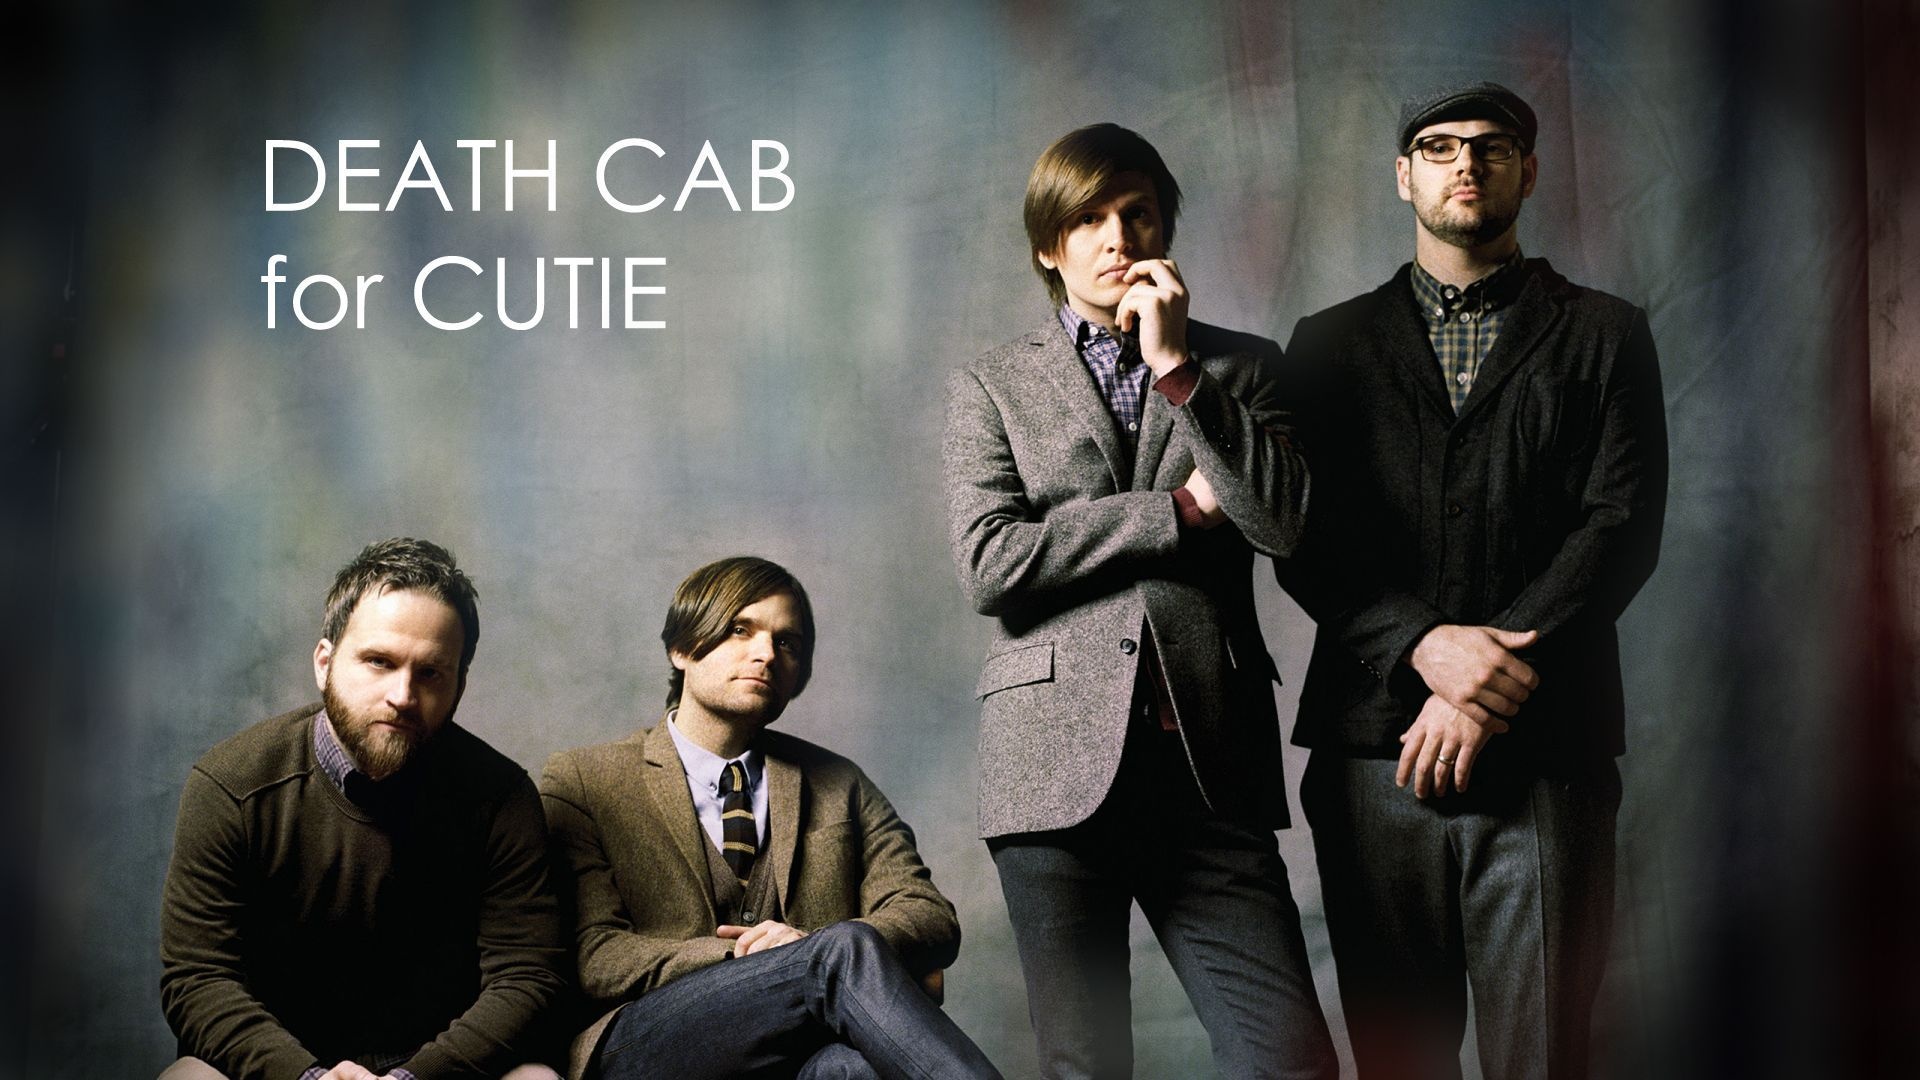 Indie rock band, Death Cab for Cutie, Music posters, Music anniversary, 1920x1080 Full HD Desktop